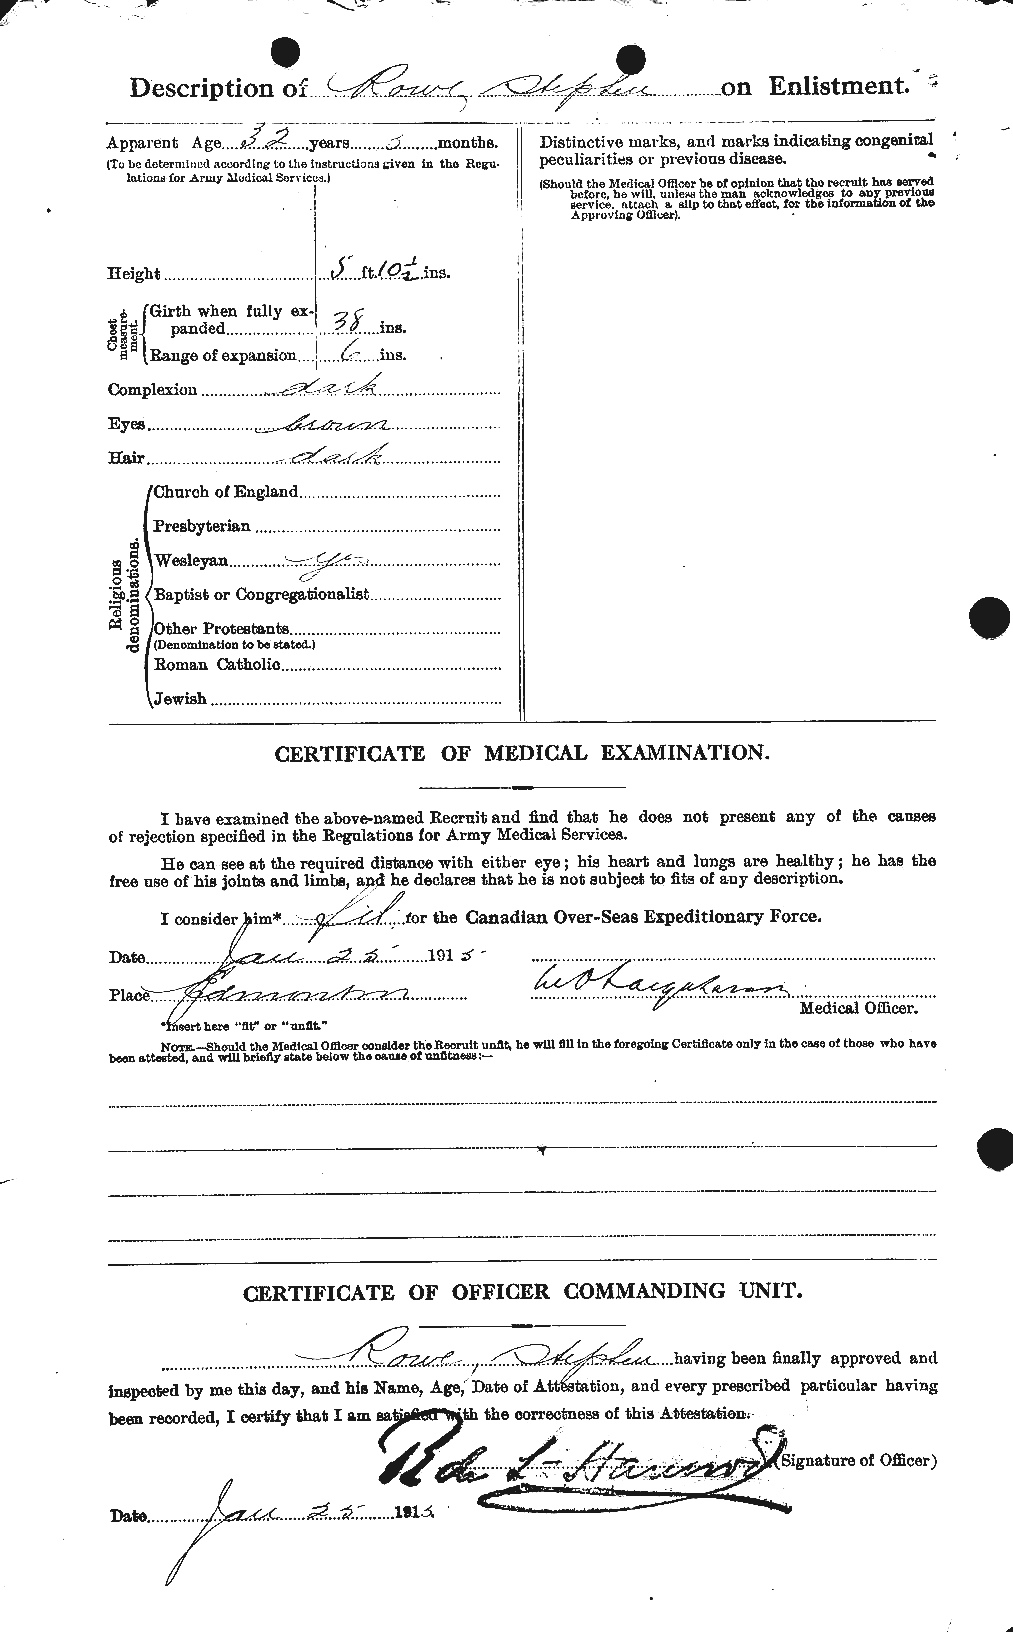 Personnel Records of the First World War - CEF 615993b